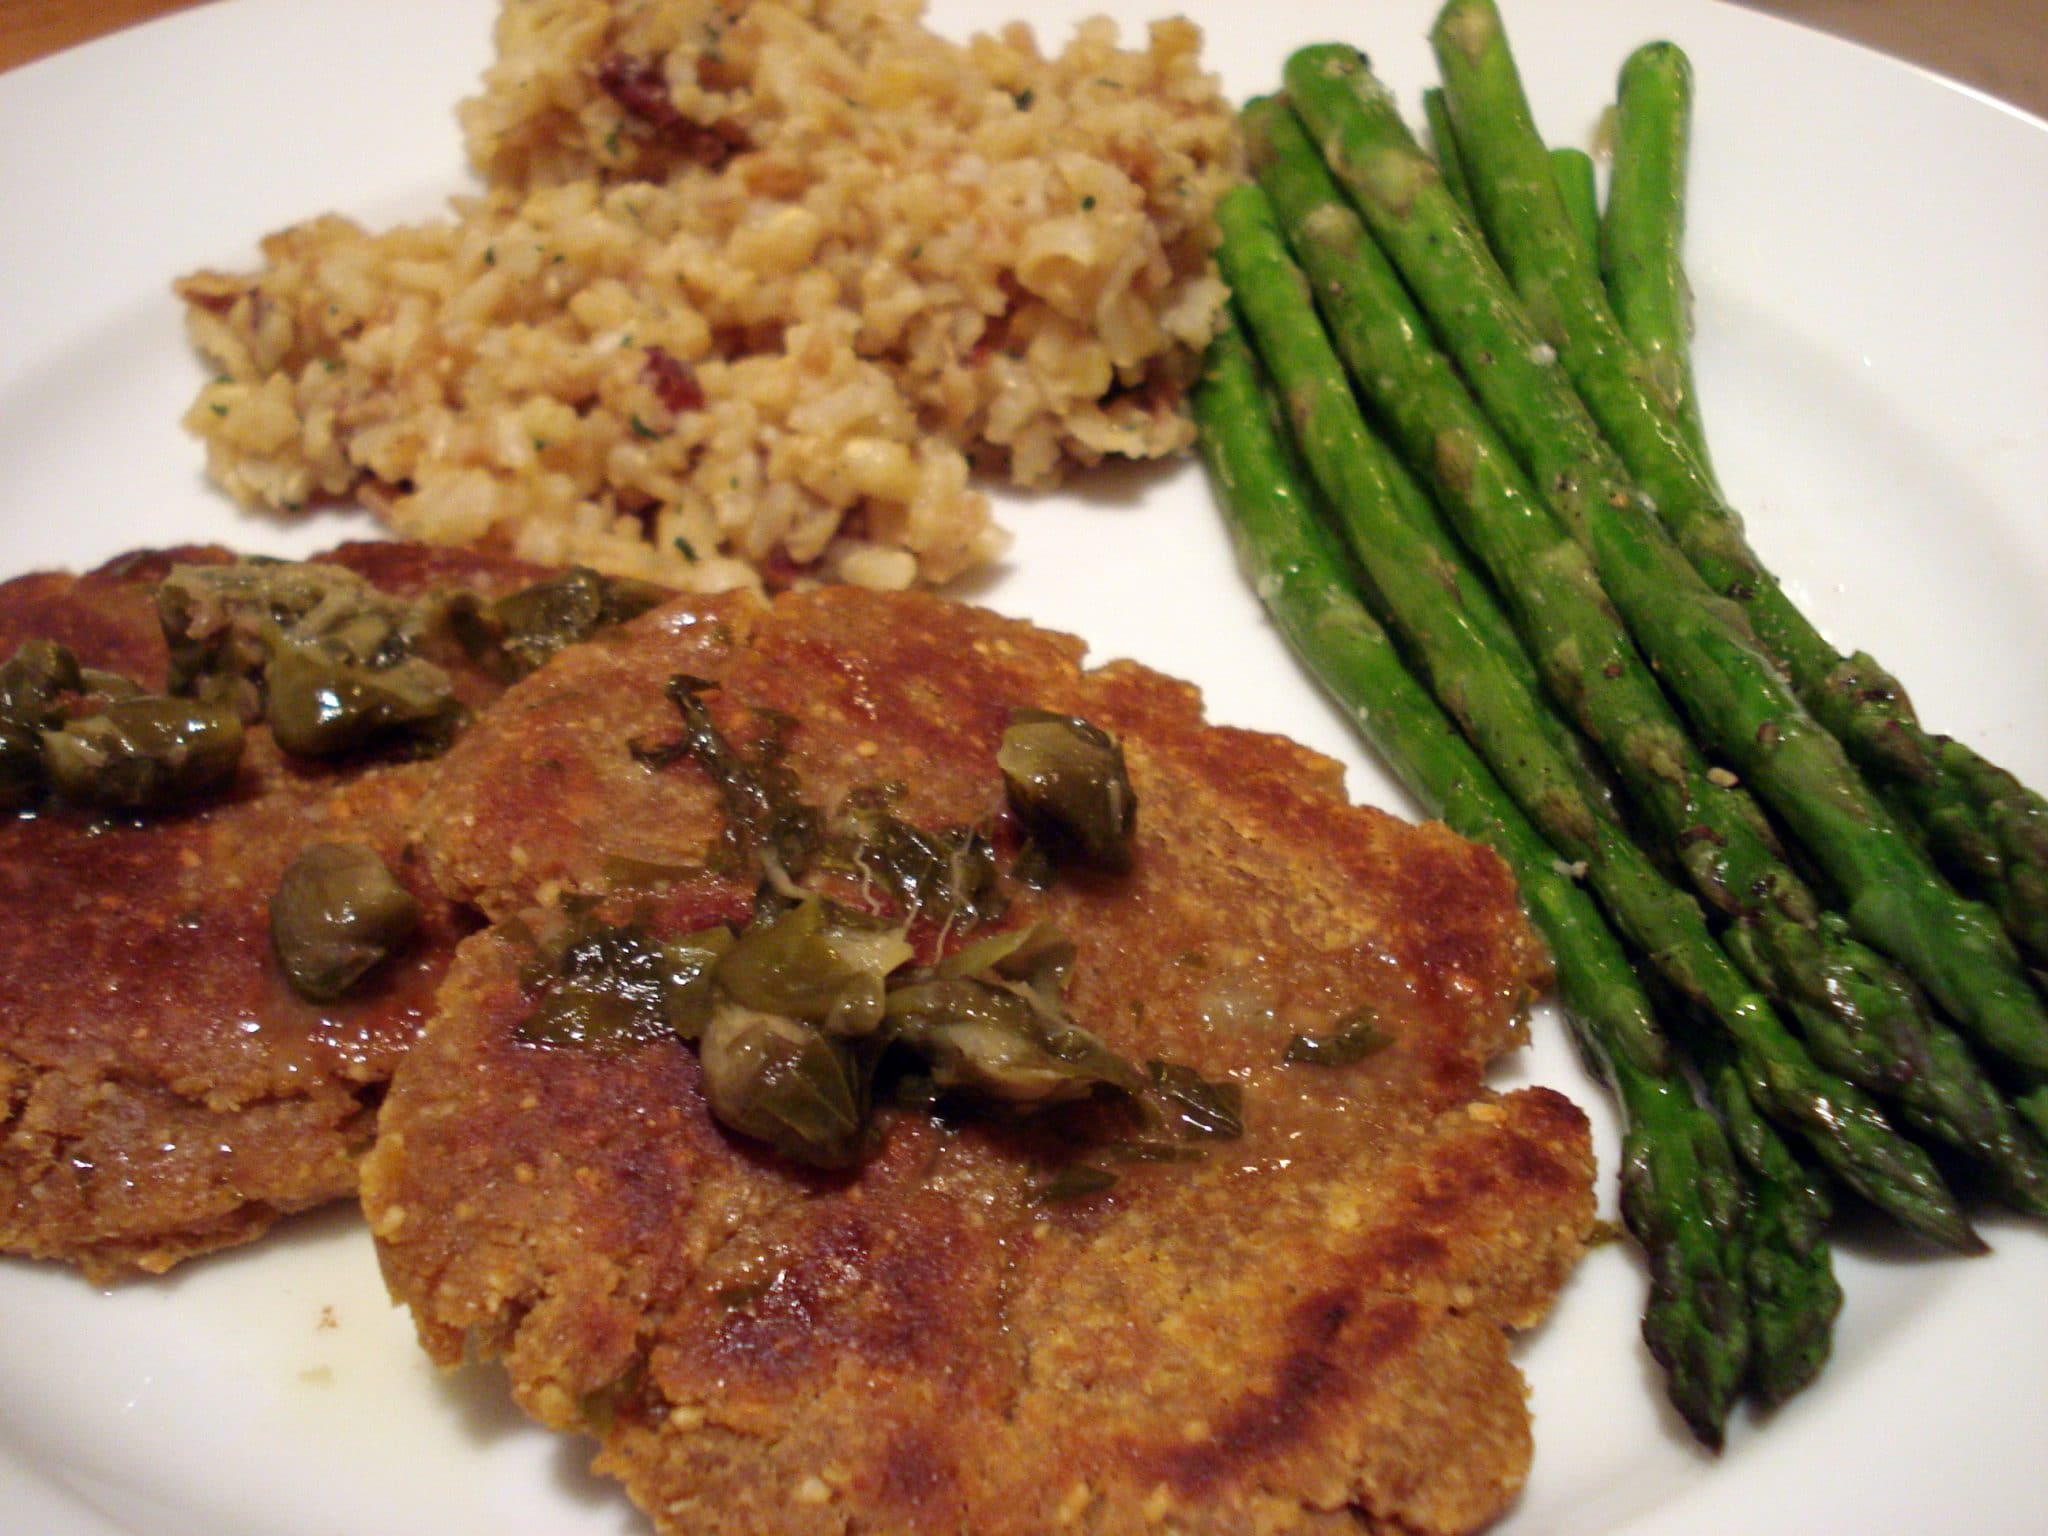 Piccata-style cashew chickpea medallions with a side of asparagus and rice